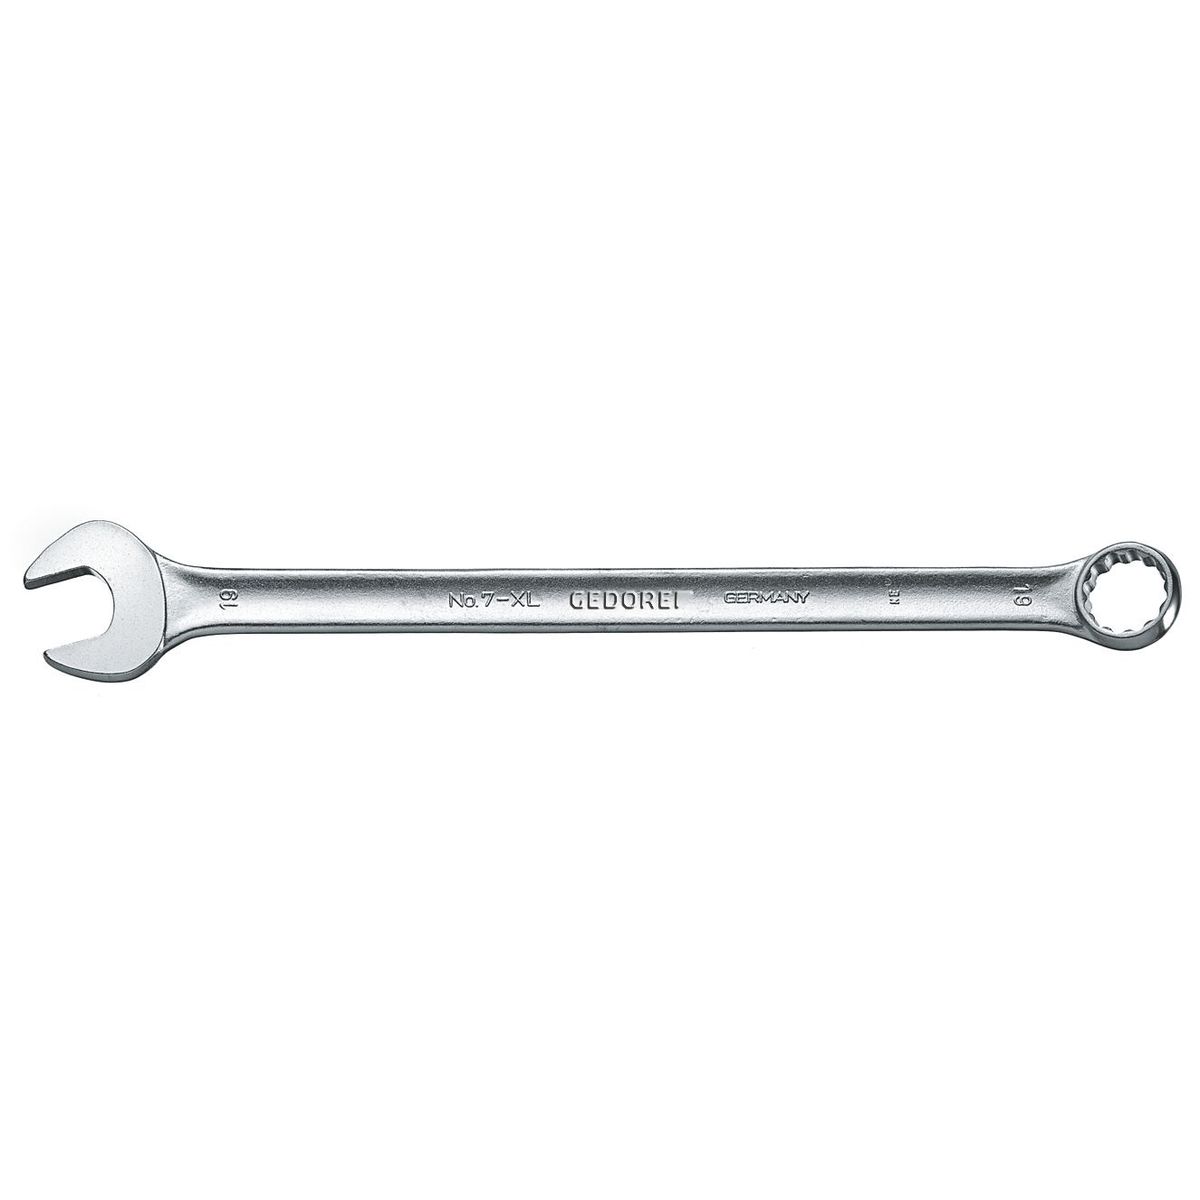 Combination spanner, extra long 41mm No.7 XL 41 Gedore